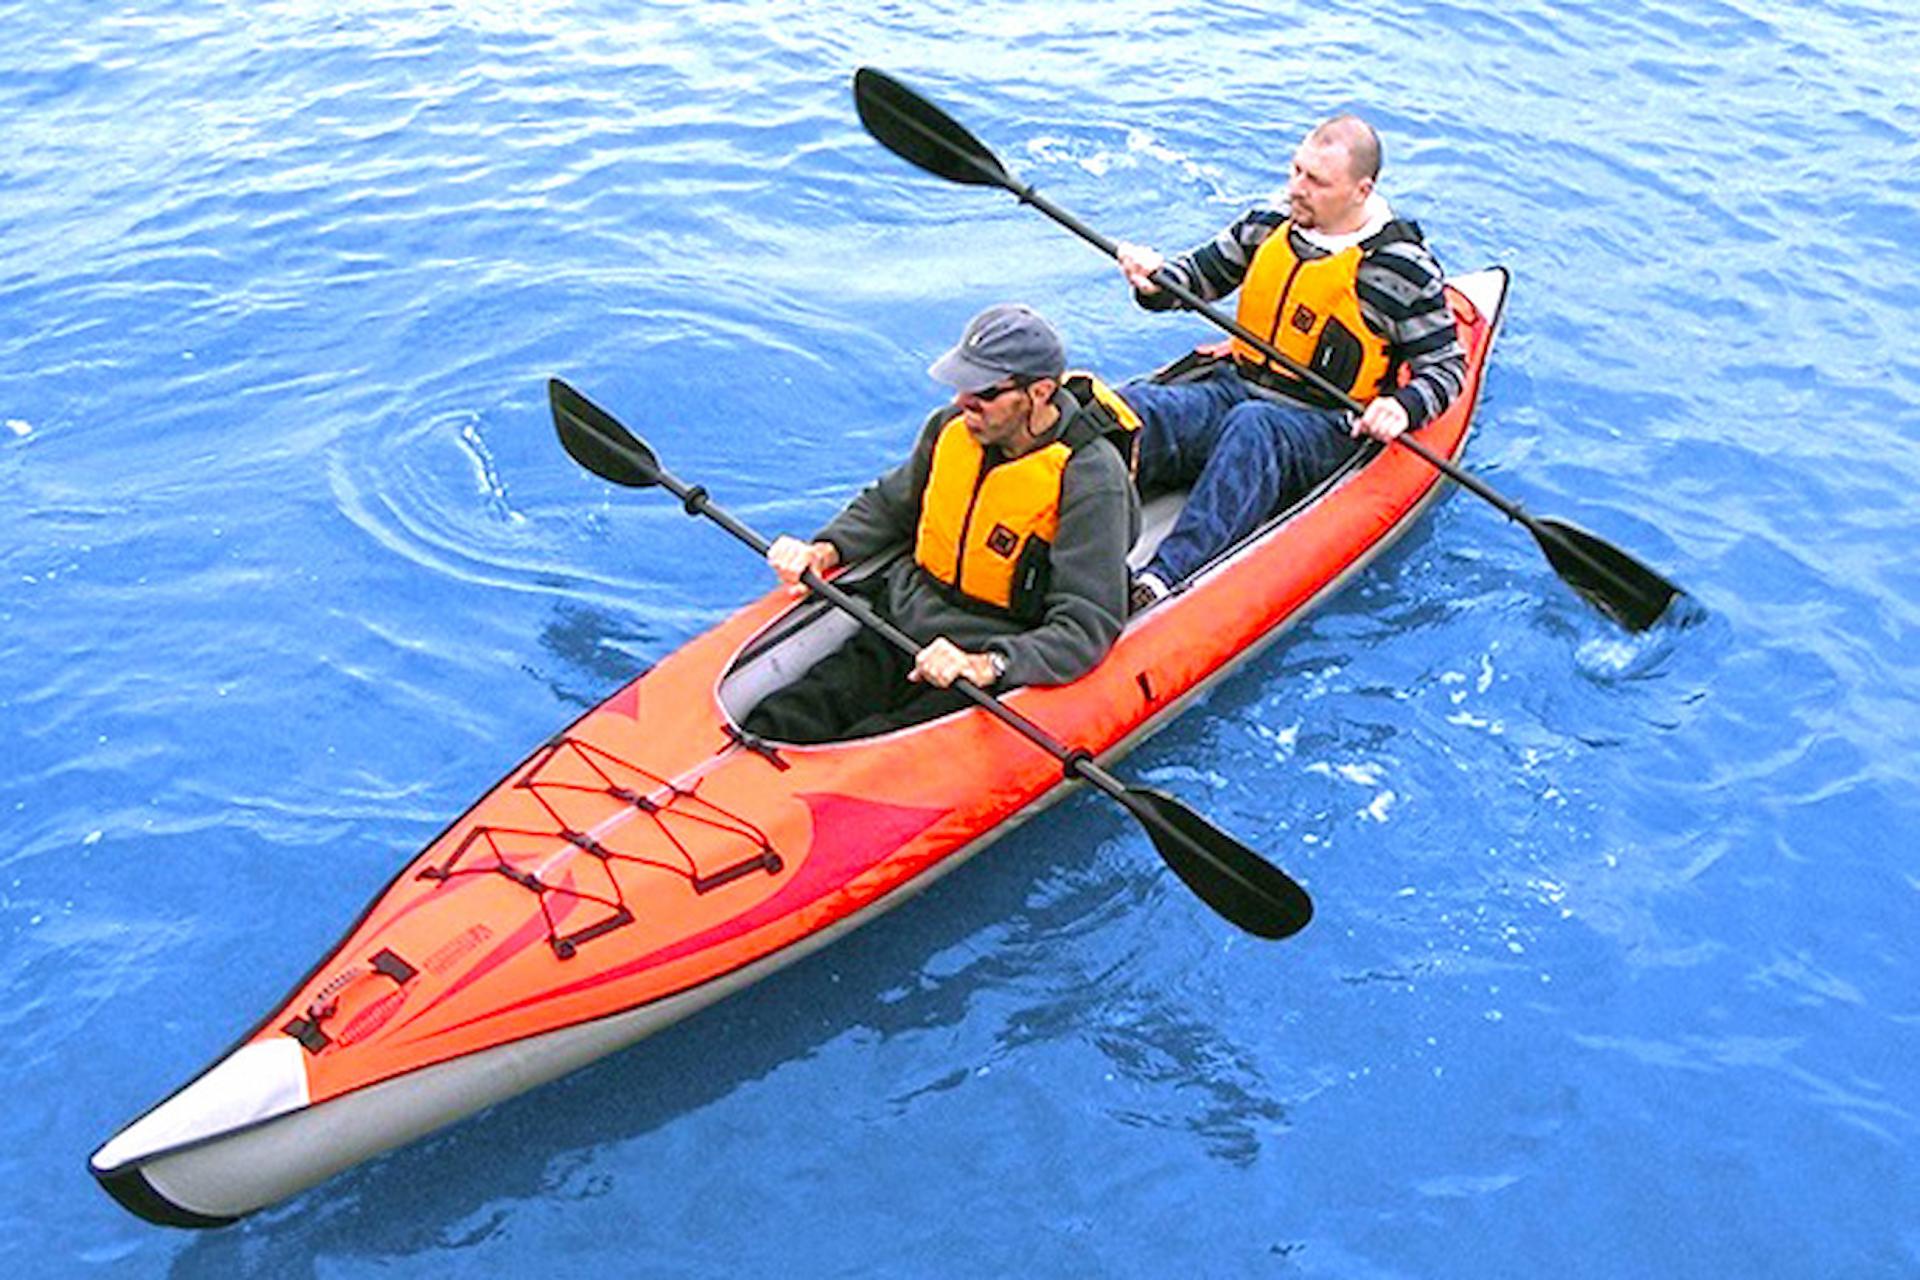 Do Beginners Need Pro Tips On Kayaking For The First Time?